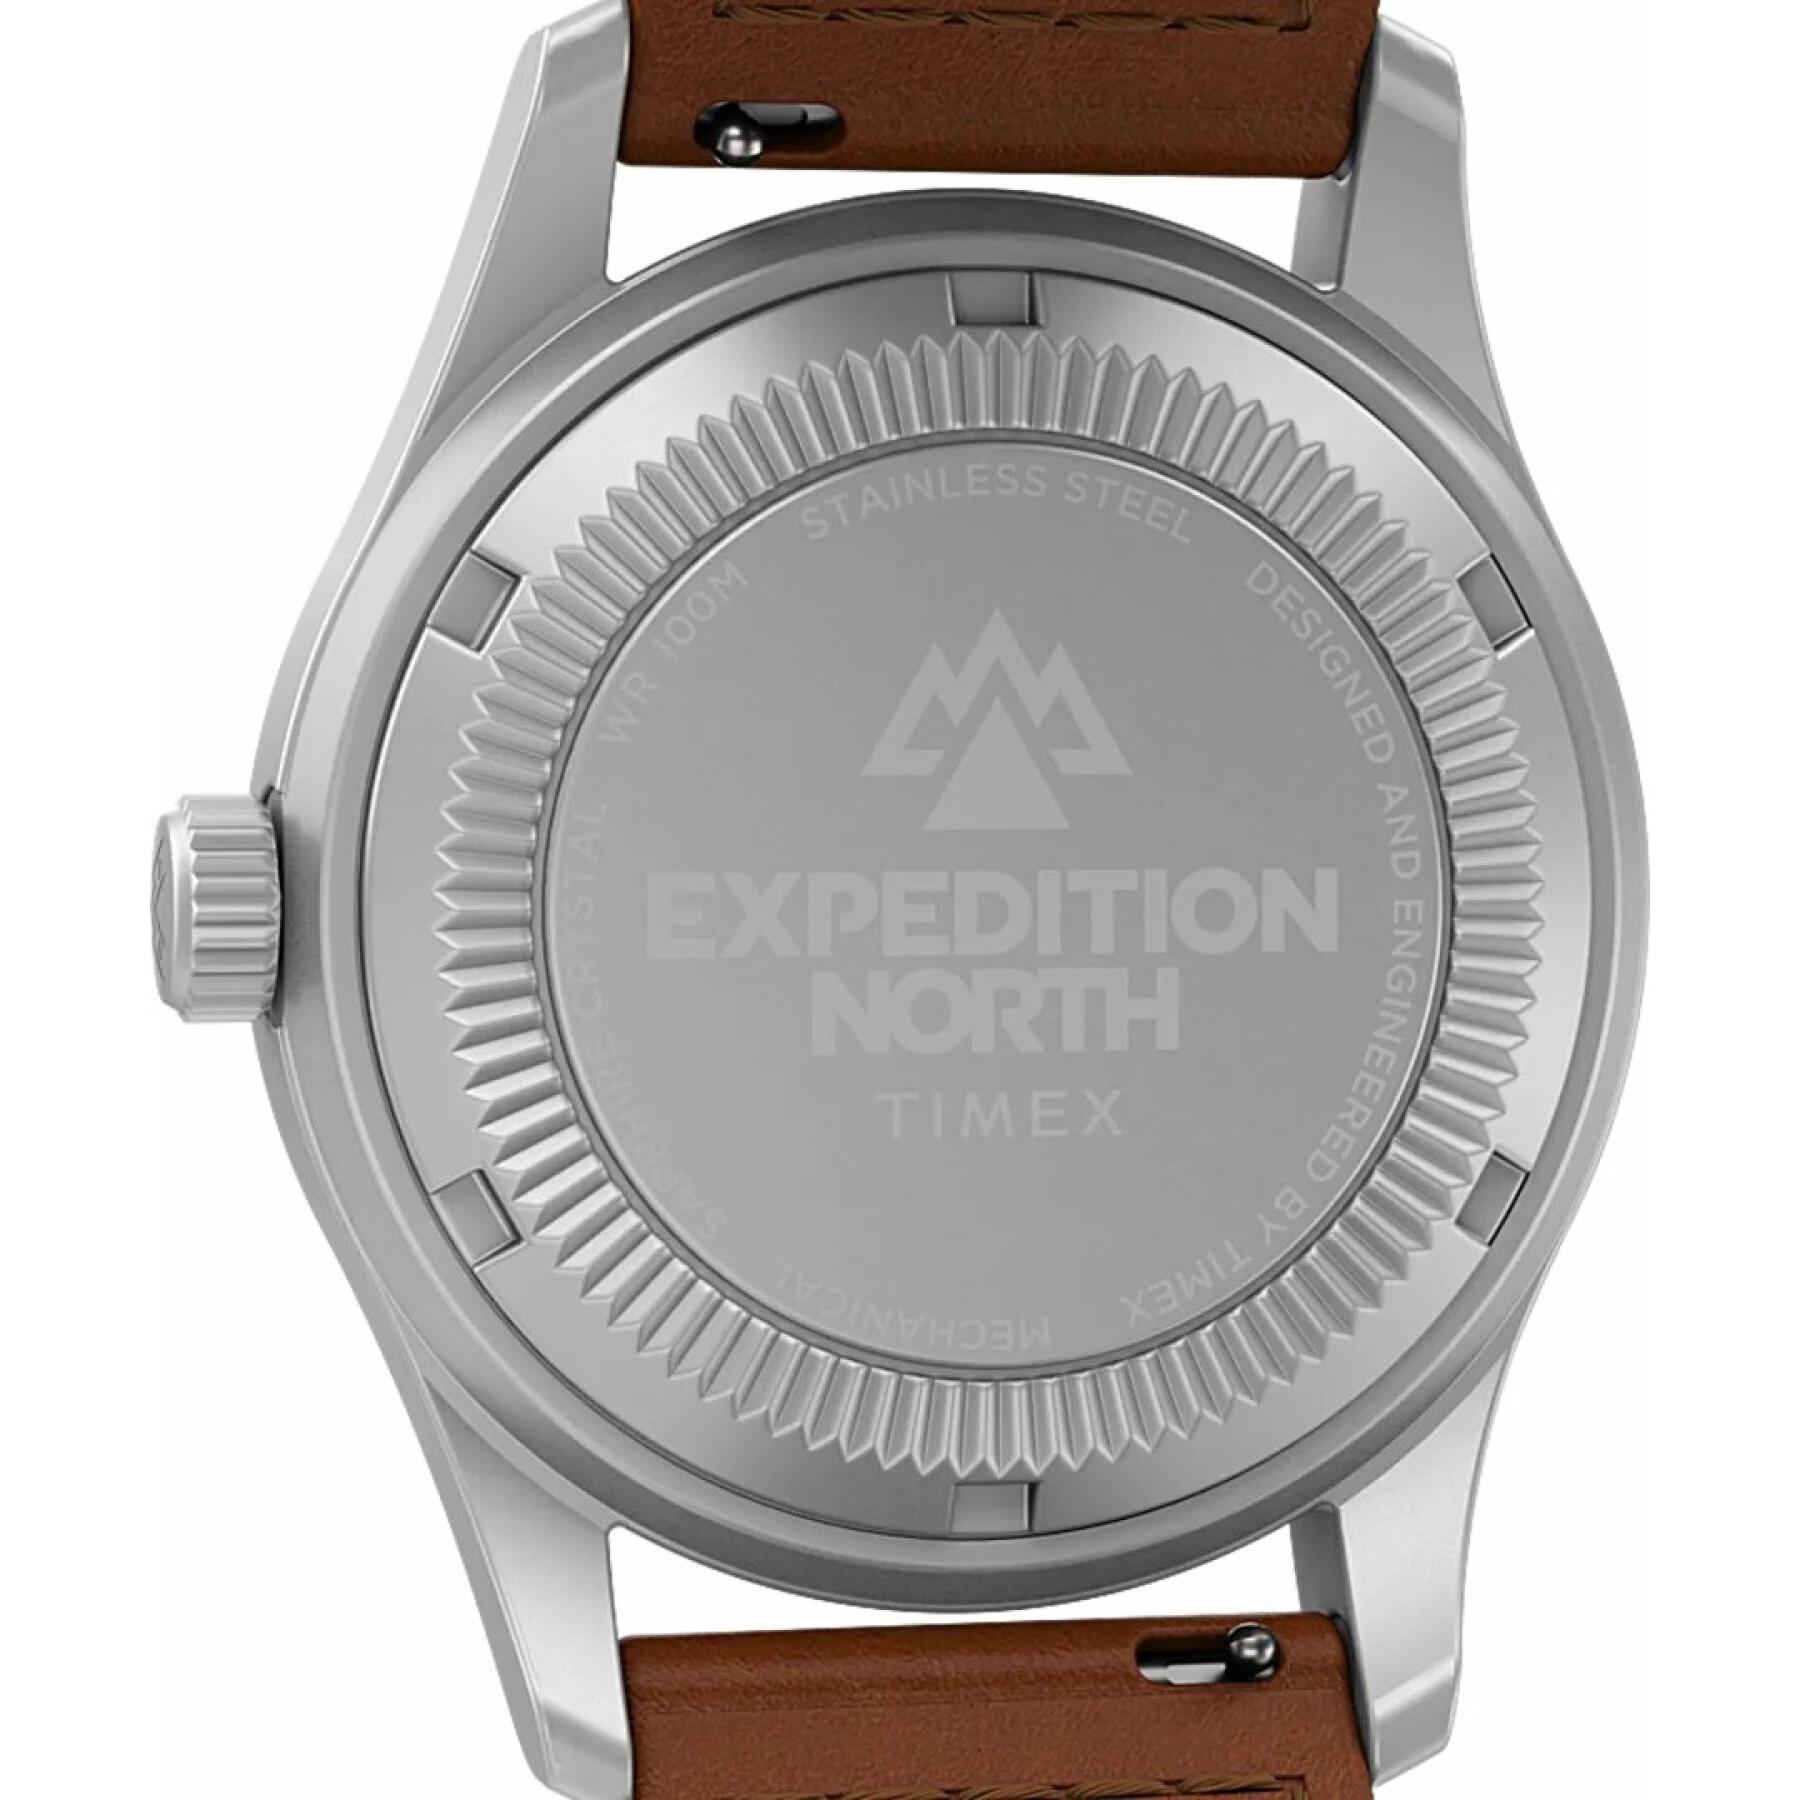 Watch Timex Expedition North Tide Temp Compass